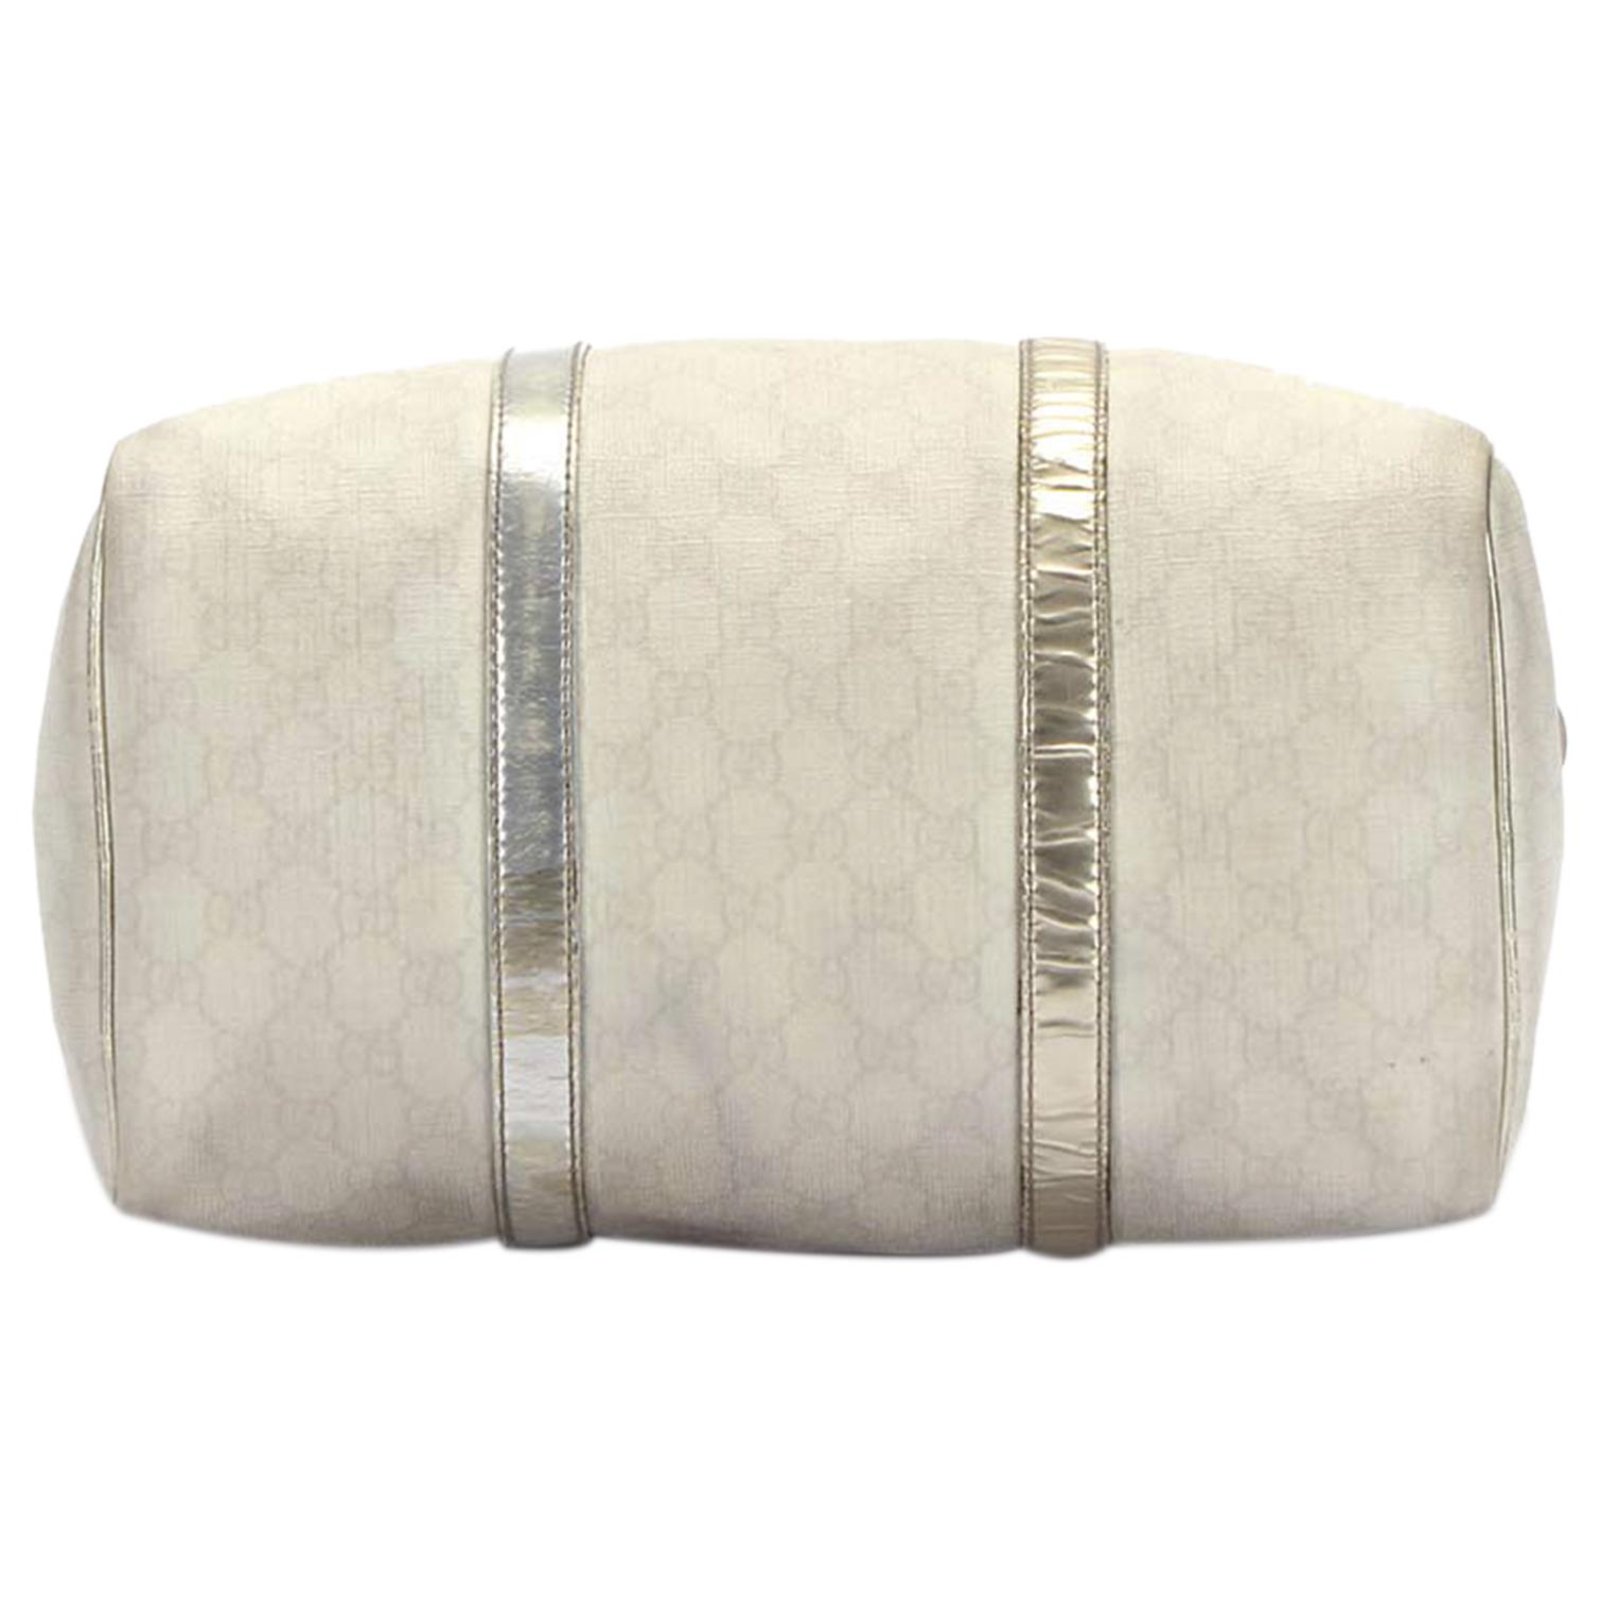 Fashion White Gucci Embossed Leather Fabric For Handmade Shoes ,Bags H –  chaofabricstore